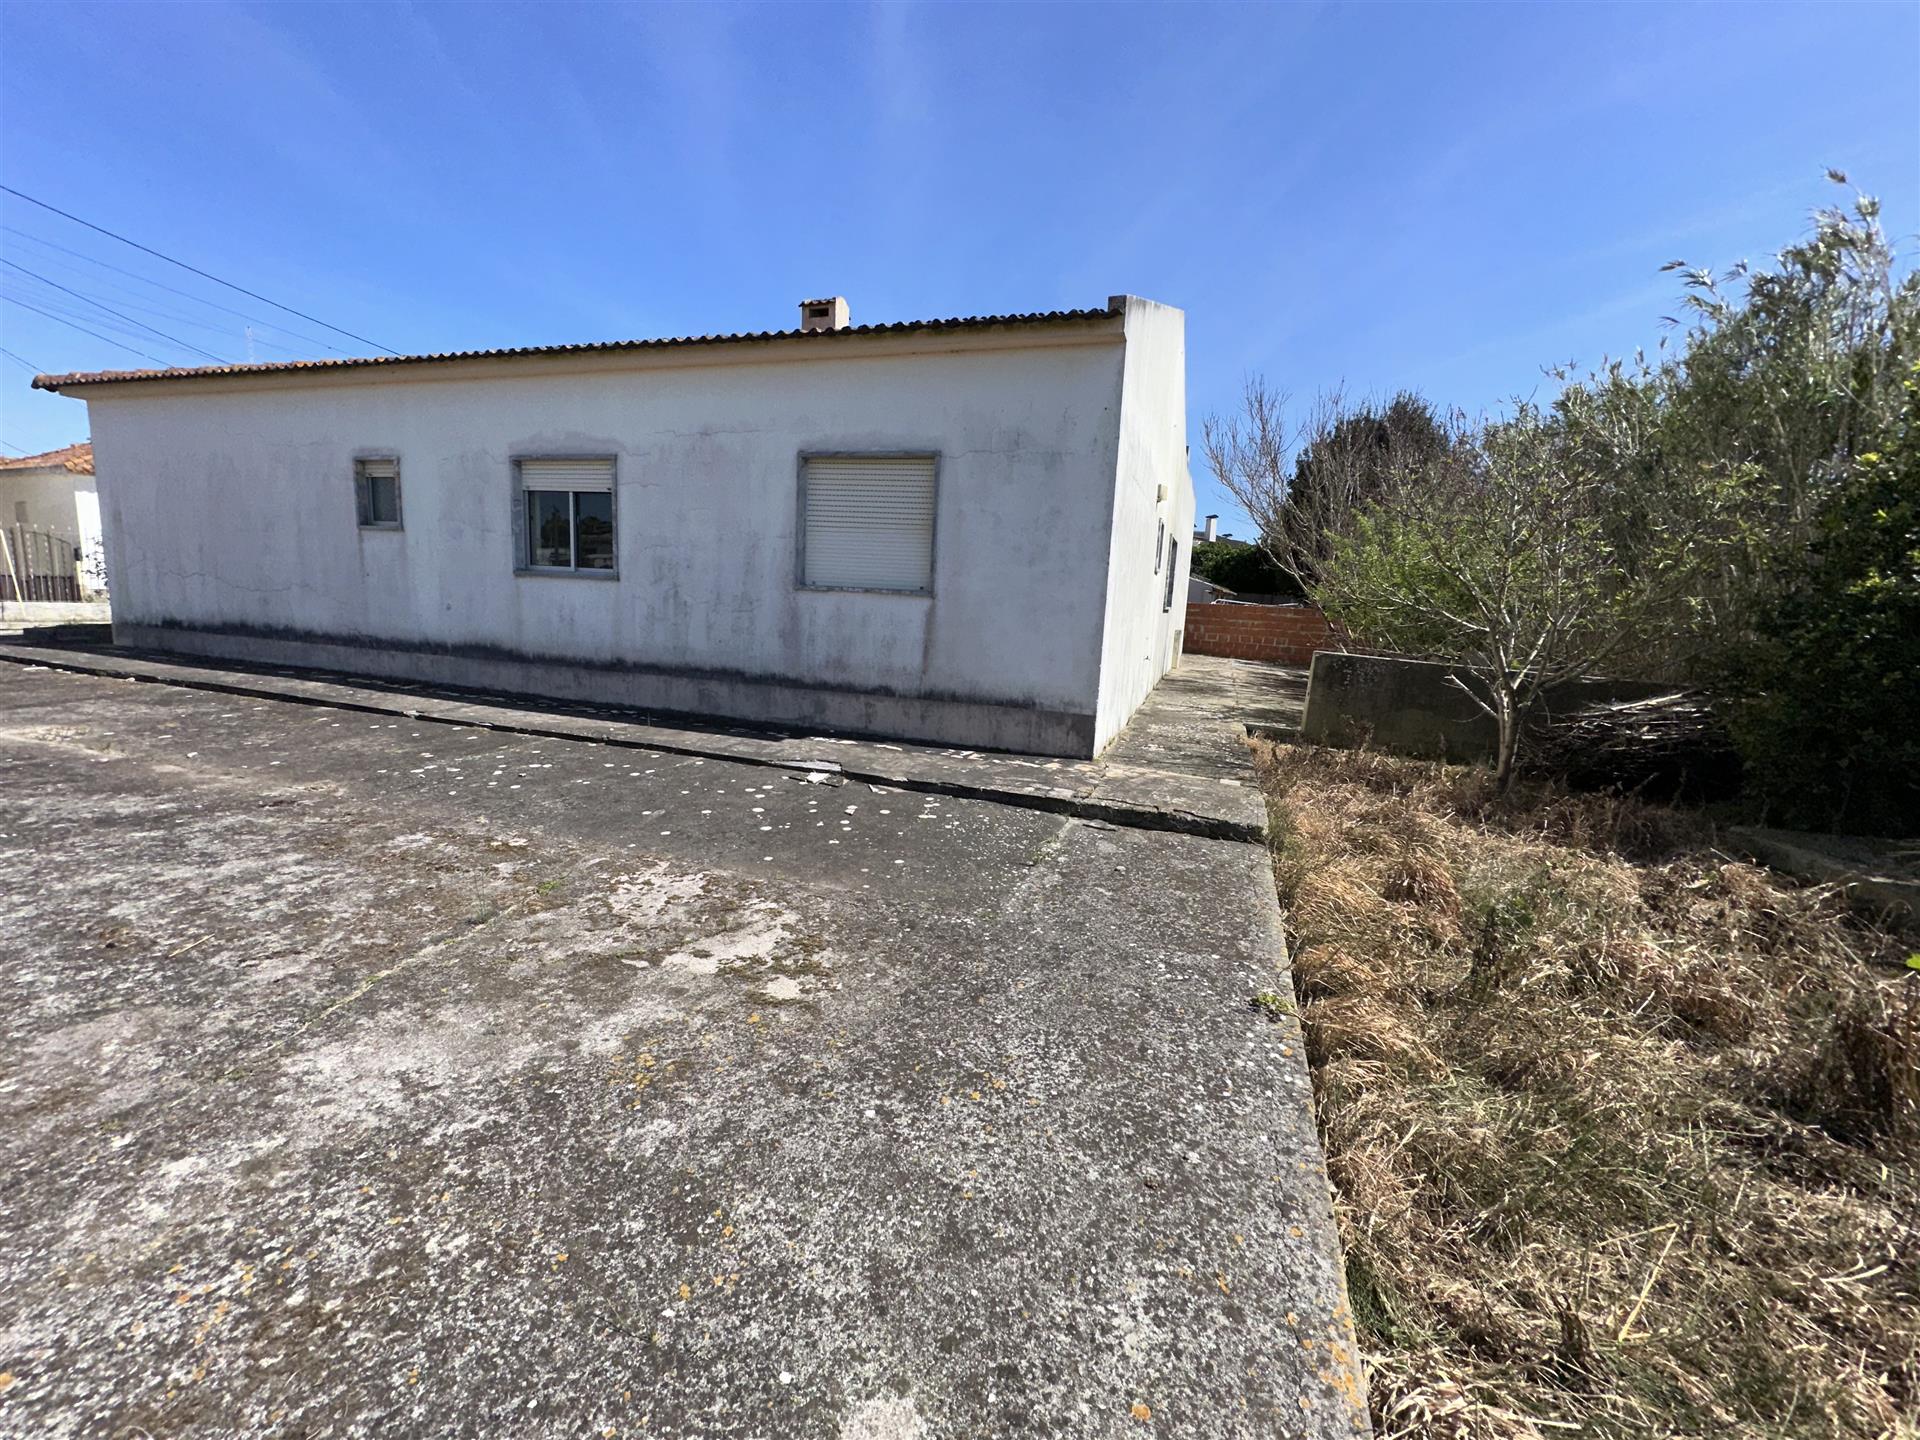 House with land, Lourinhã (center), one floor, a few minutes from the beach